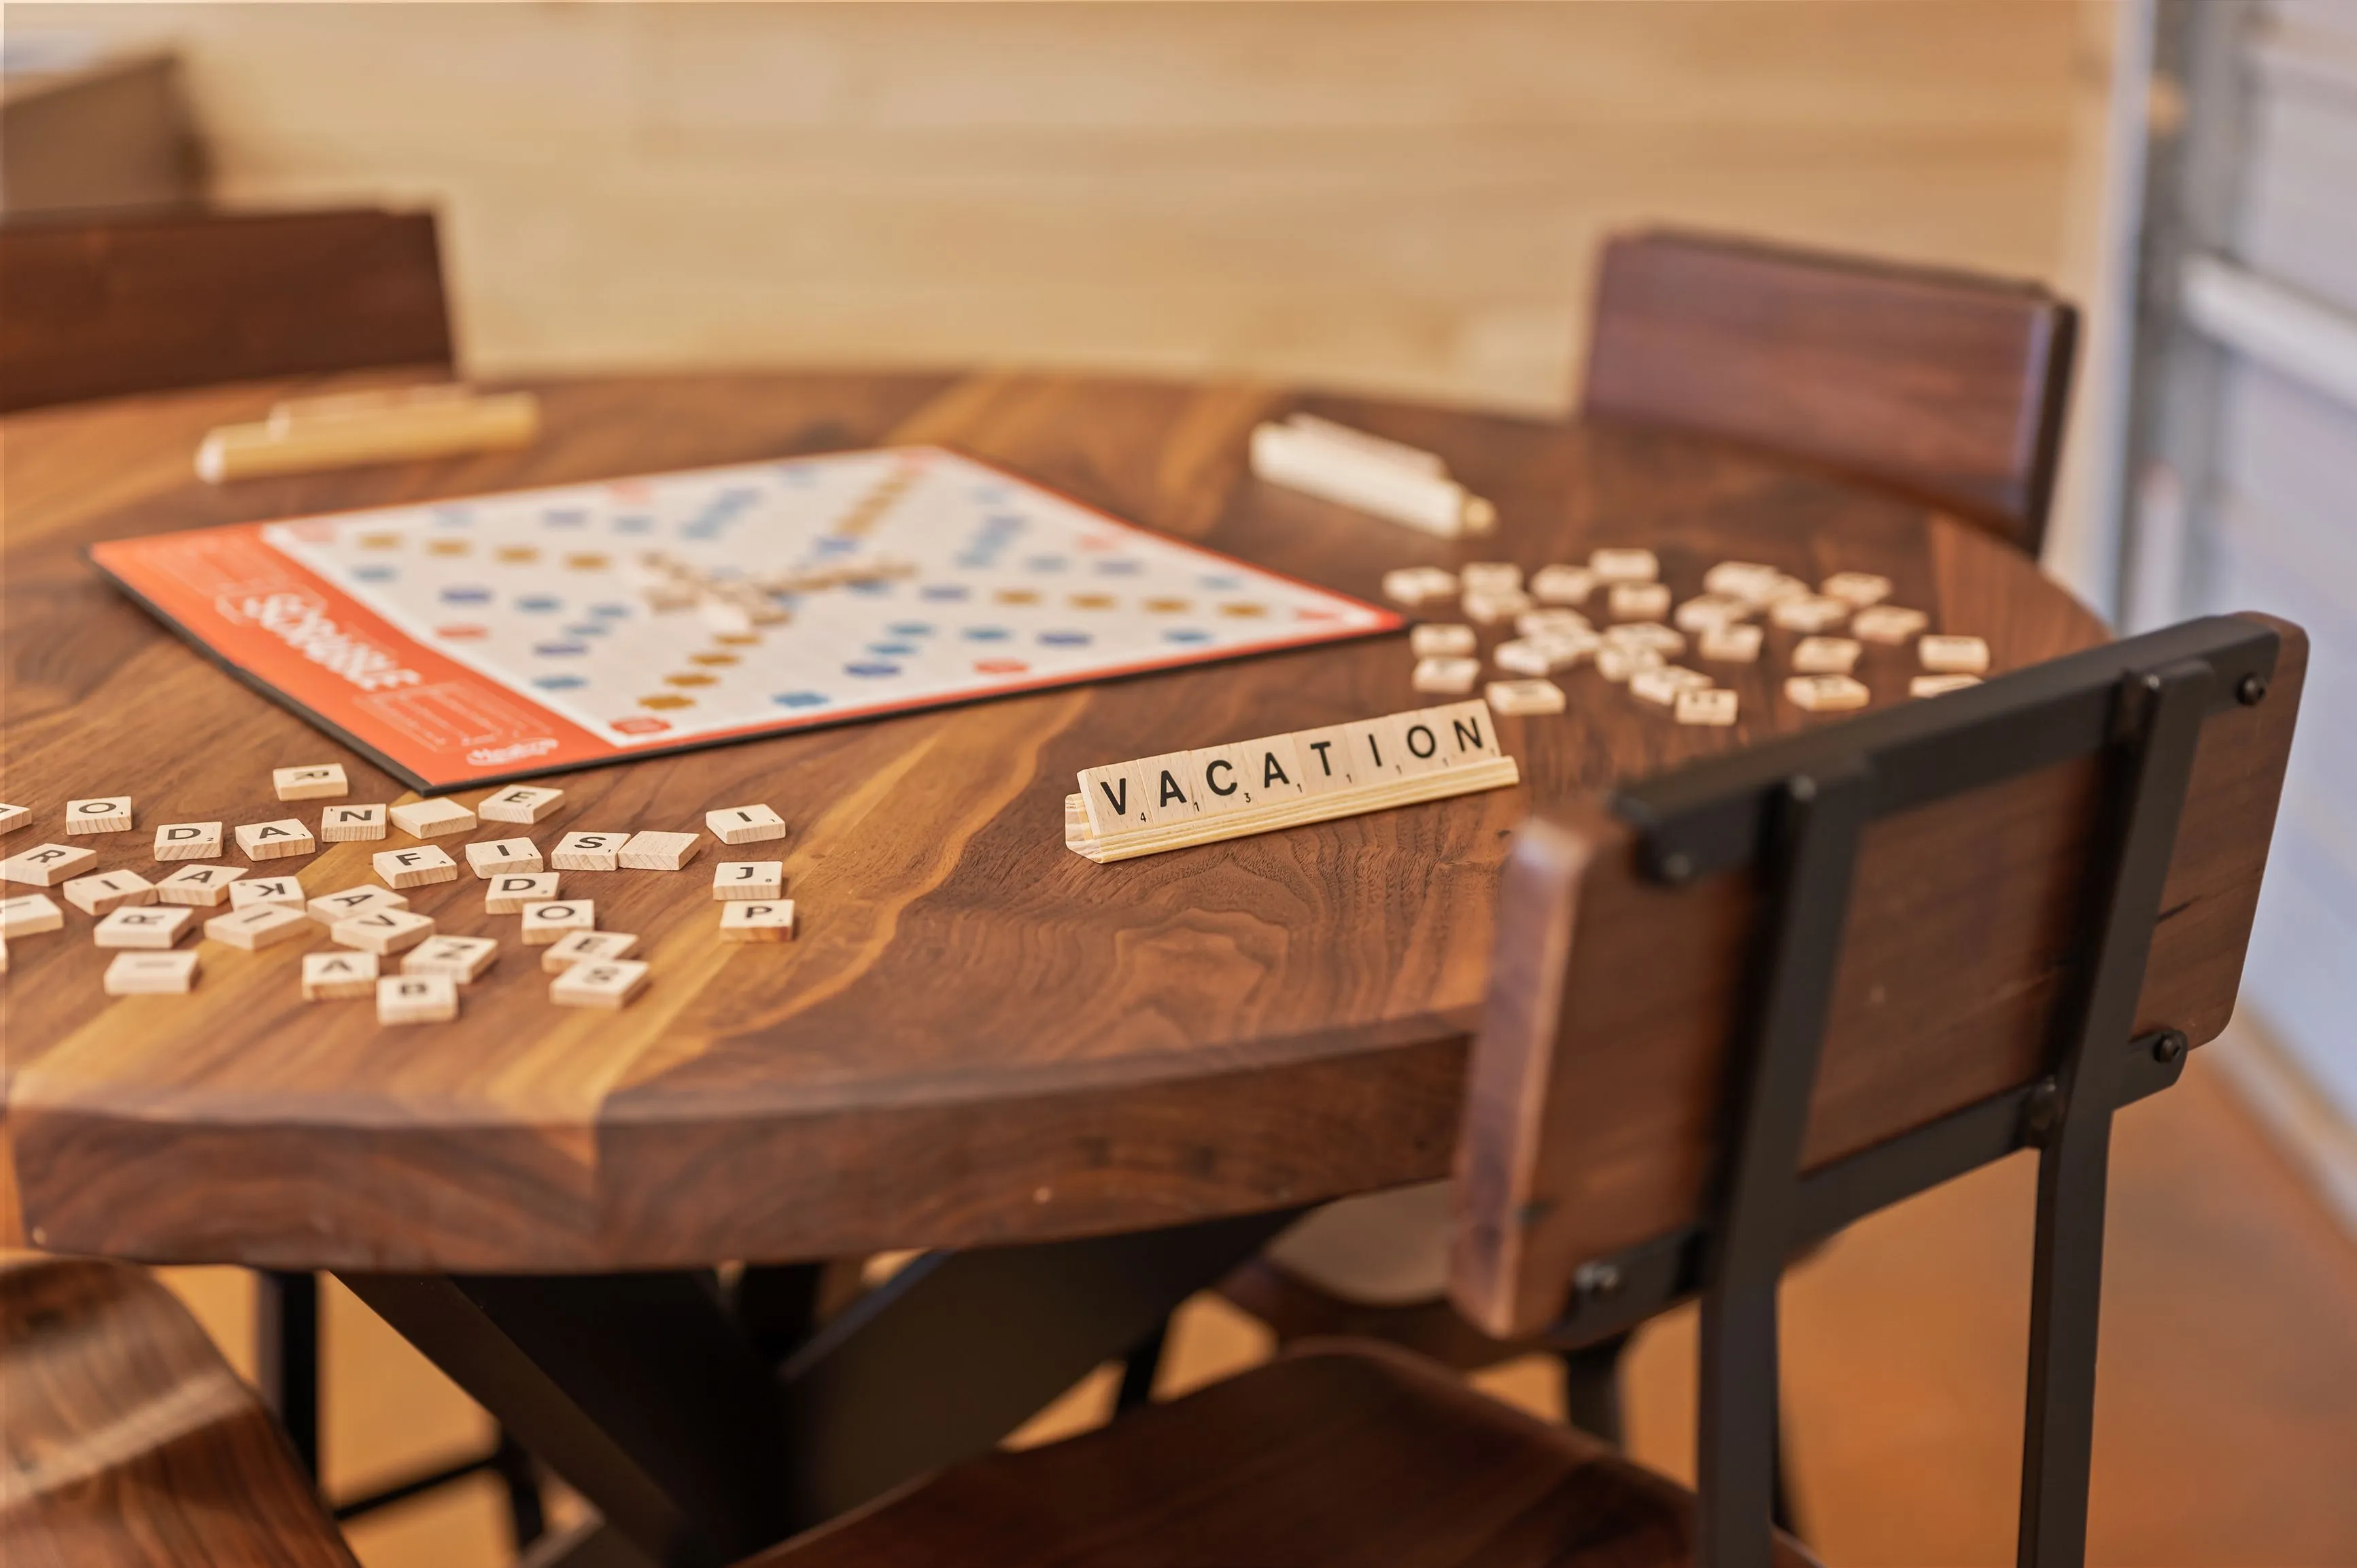 Wooden table with a Scrabble board game and tiles, a rack with the letters spelling "VACATION," and chairs around the table.